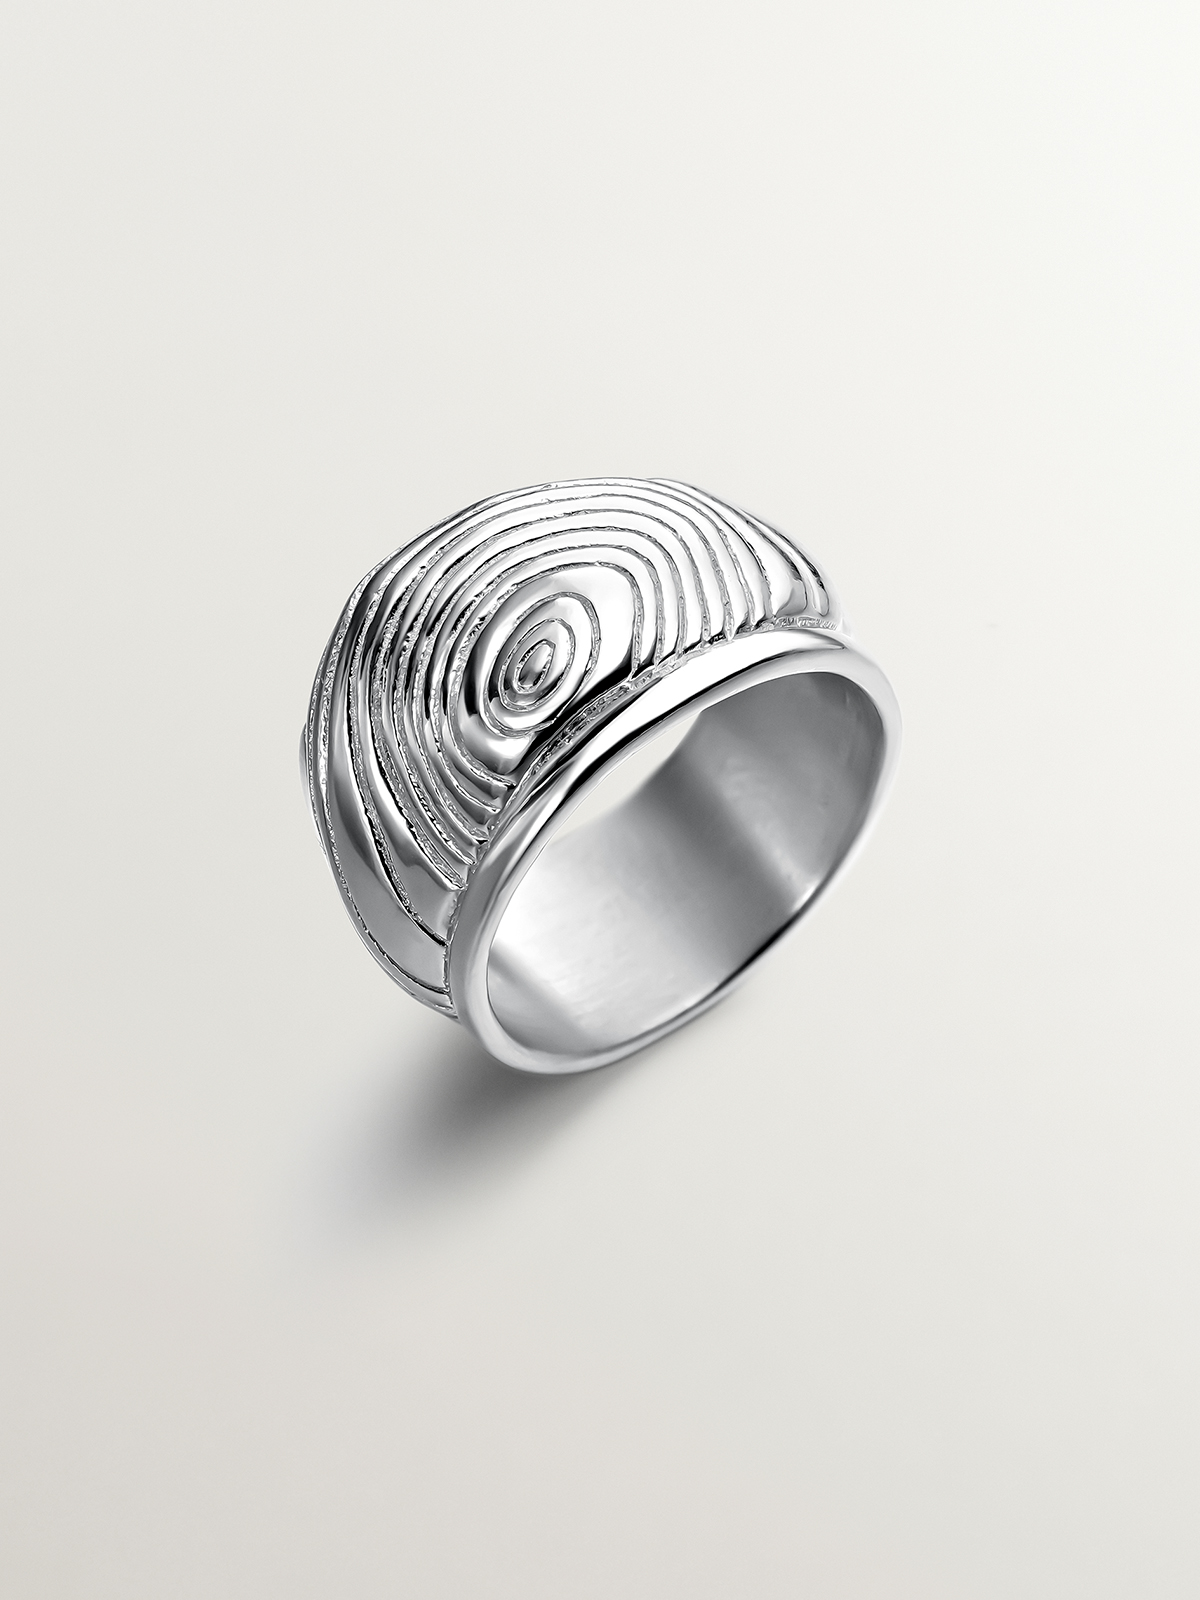 Wide 925 silver ring with embossing and irregular shape.